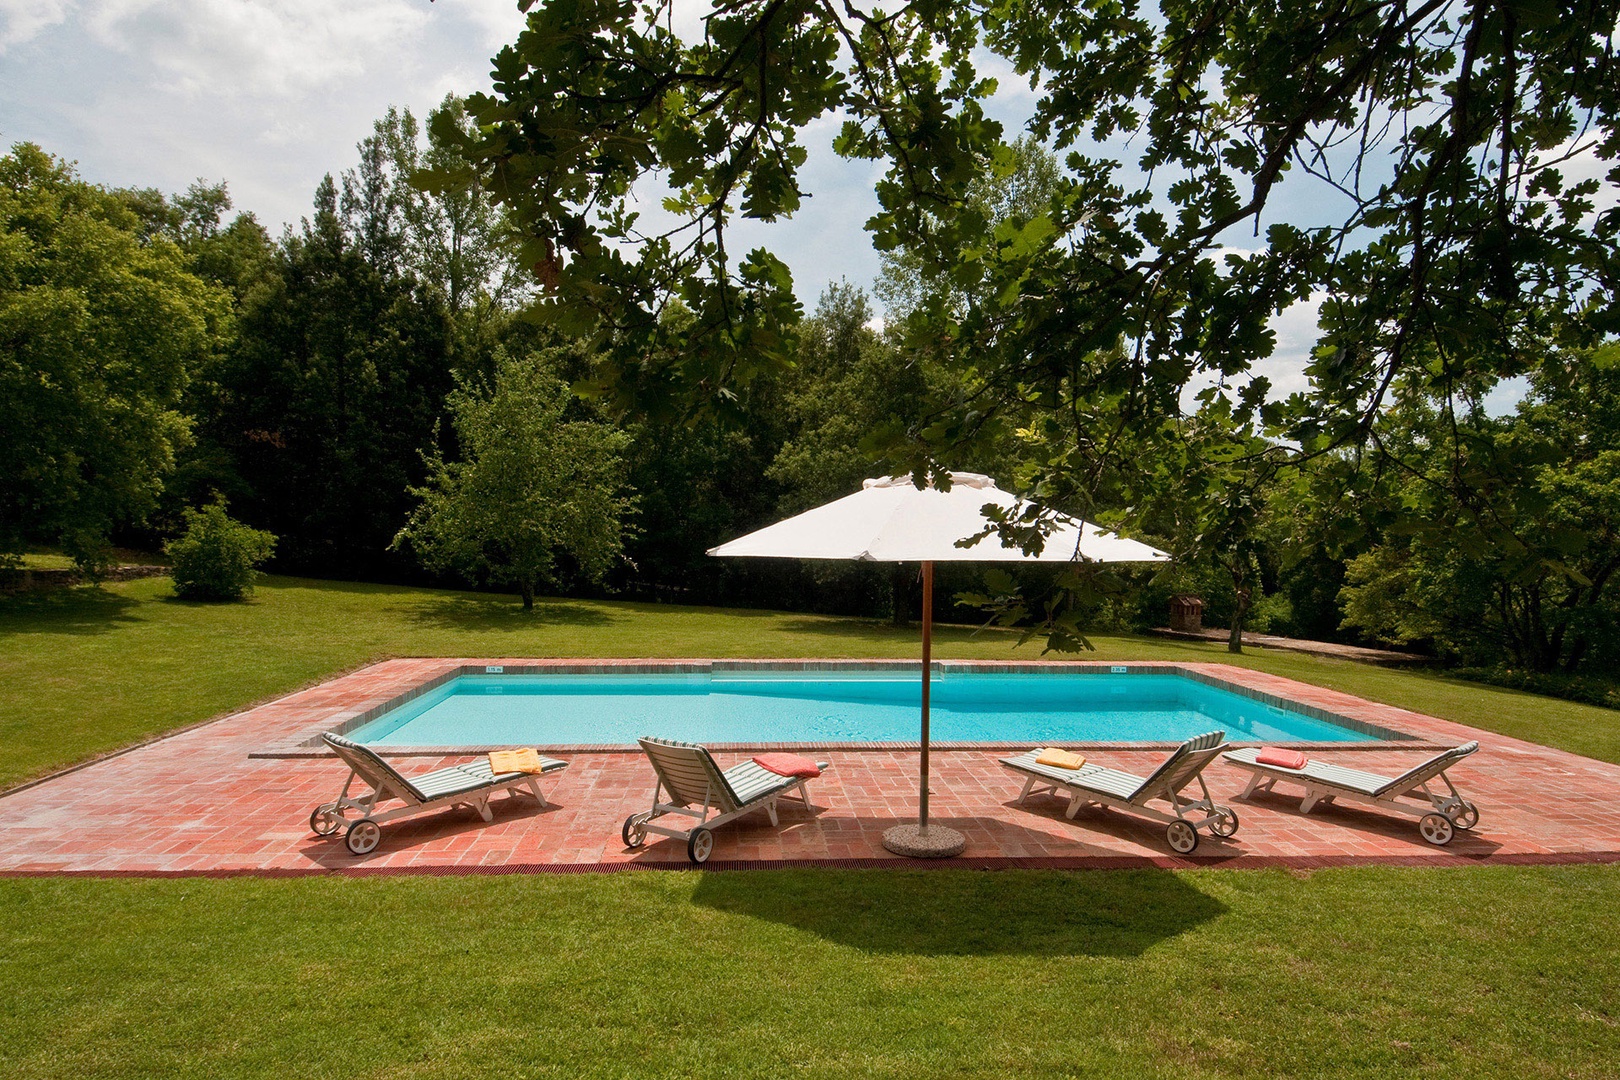 Enjoy many hours of enjoyment during summer months in the private pool.